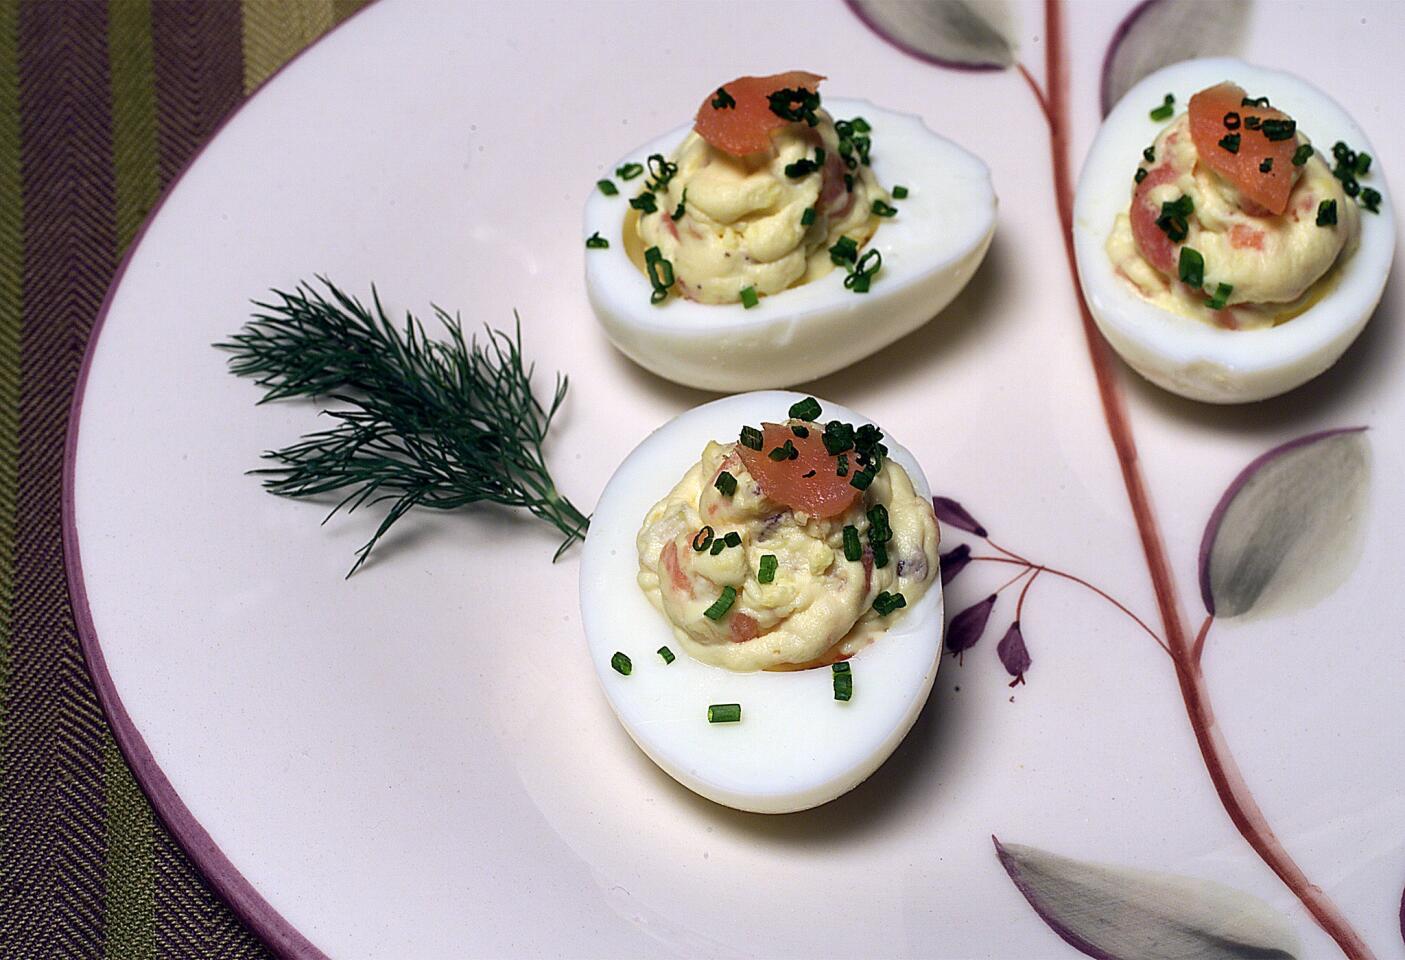 Deviled eggs with smoked salmon, fennel and capers